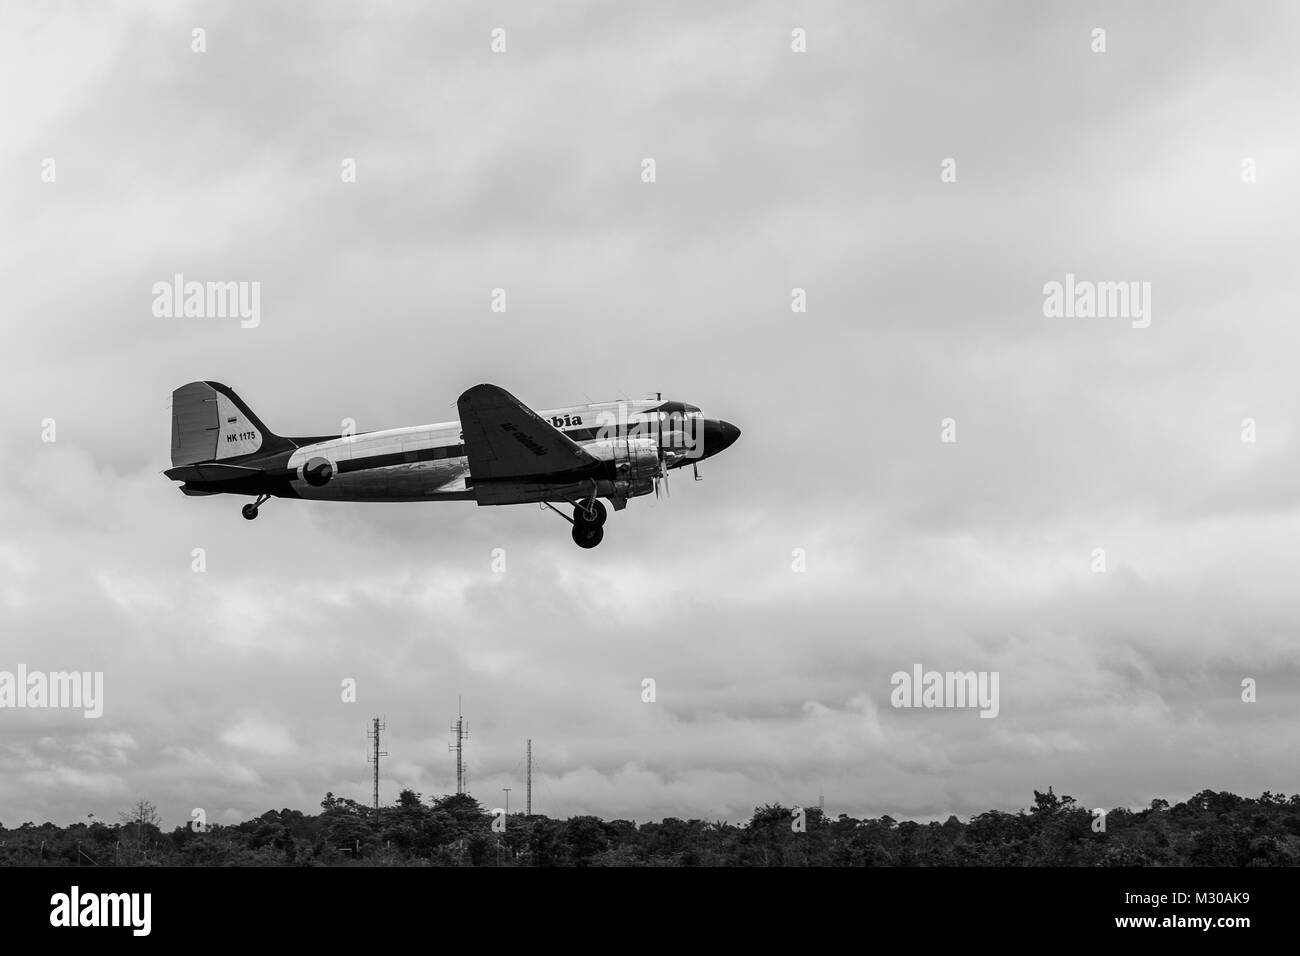 A Douglas DC-3 aircraft is seen landing at the airport of Puerto Inírida, Colombia. Stock Photo